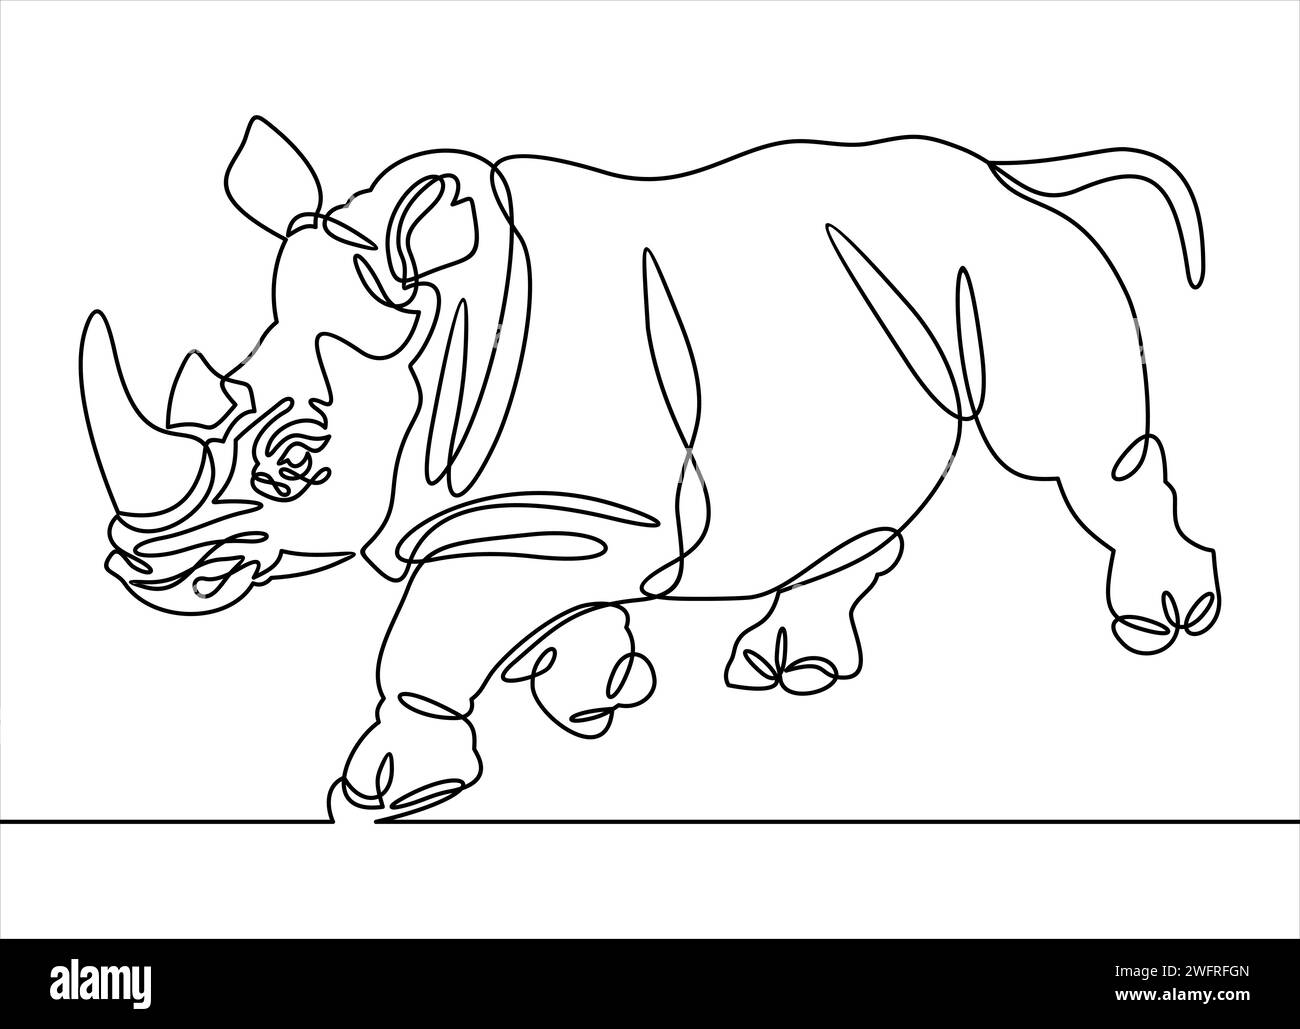 Continuous line drawing of rhino. Stock Vector